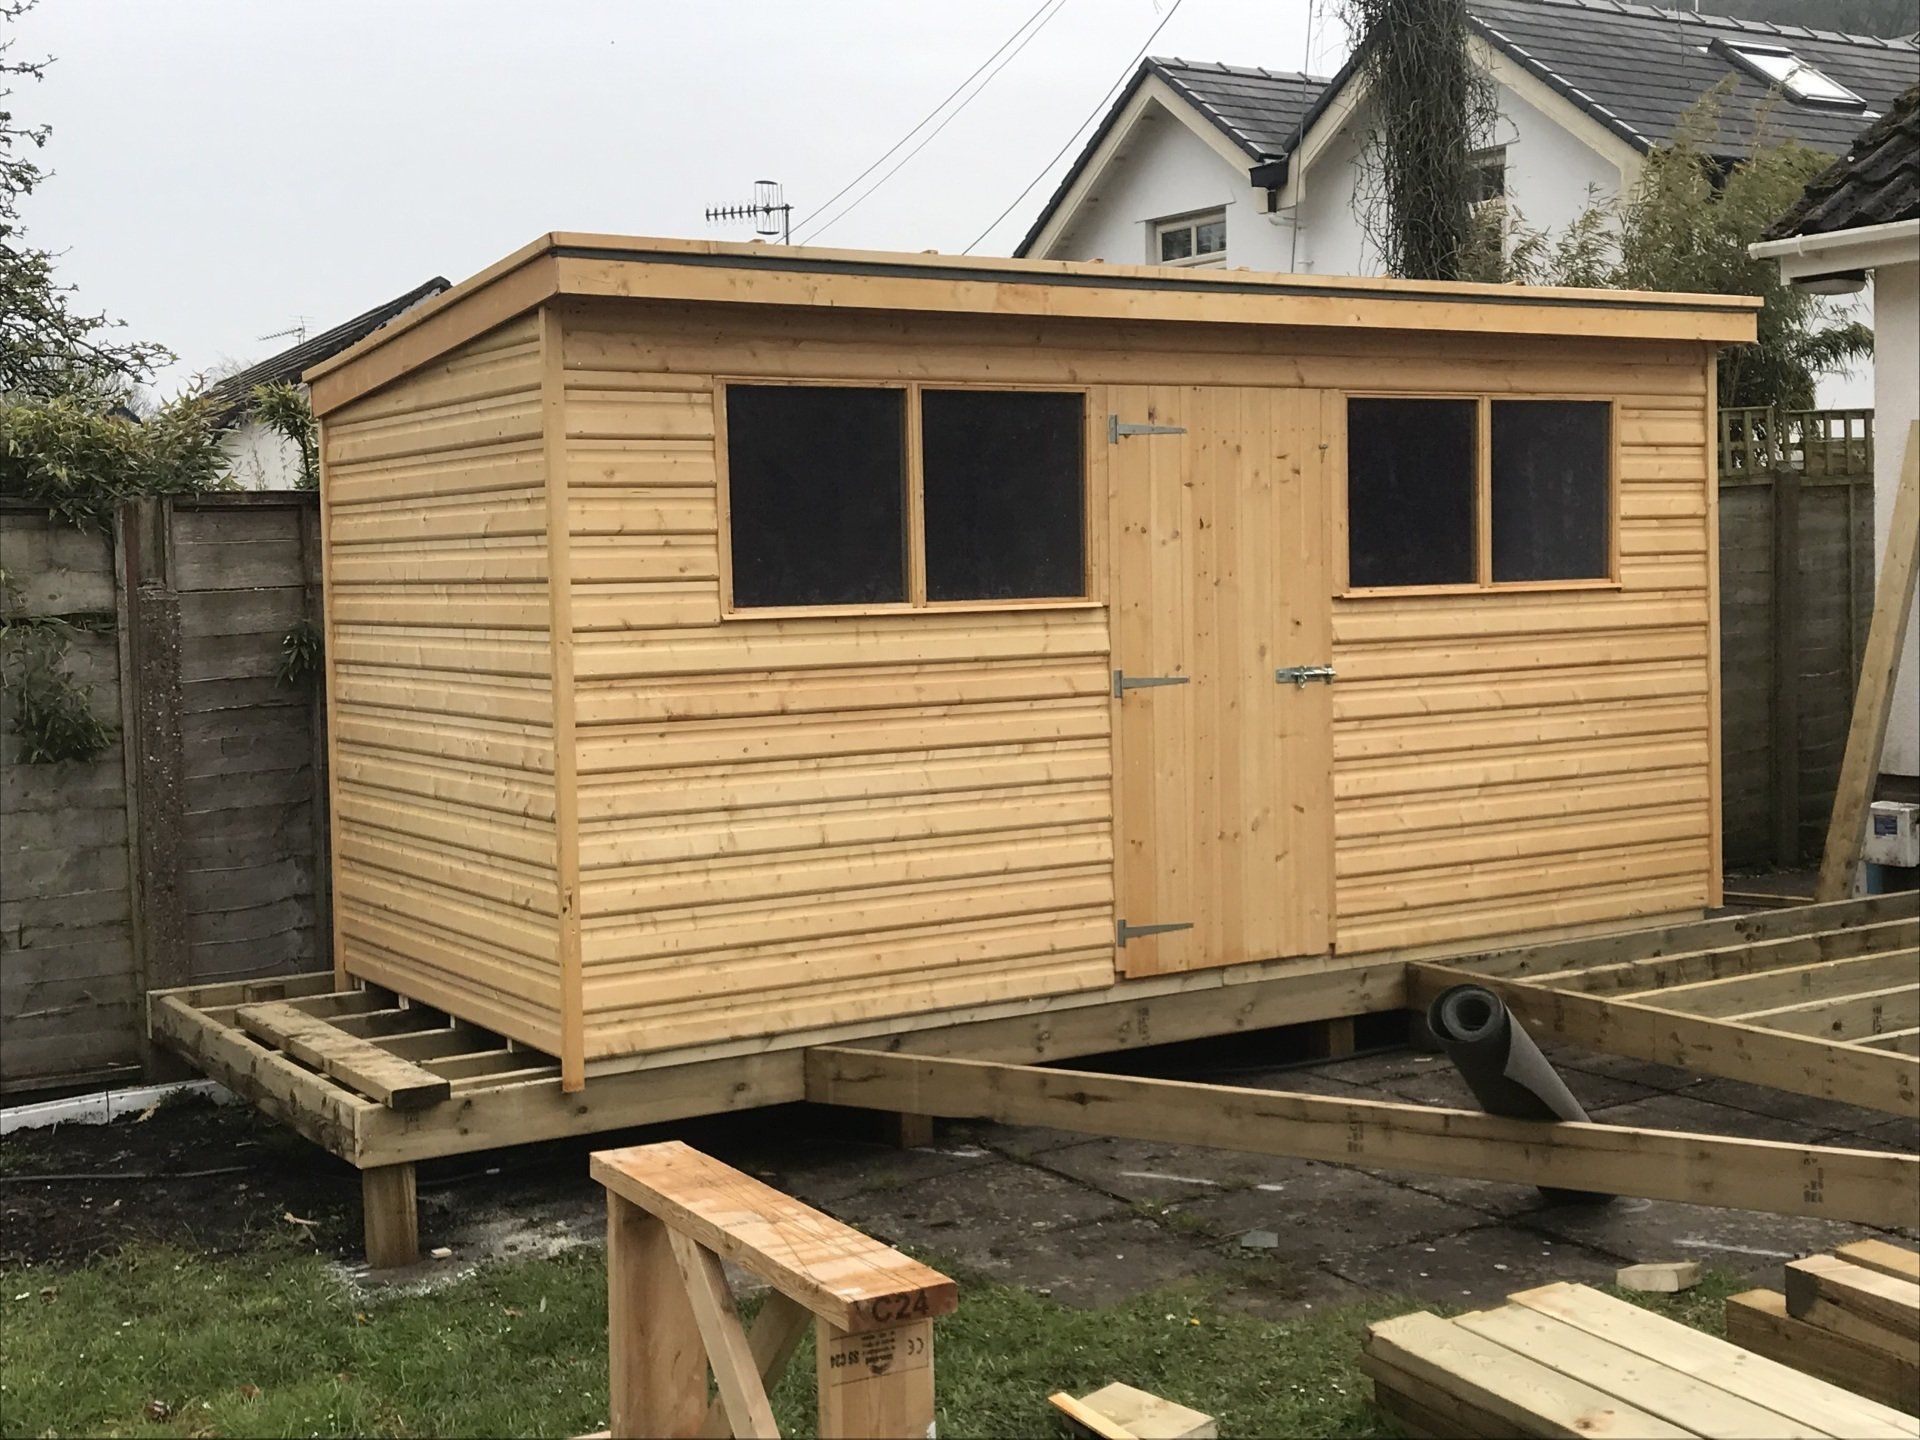 14' x 6' pent shed with single door in the middle and two 4' x 2' windows either side of the door.